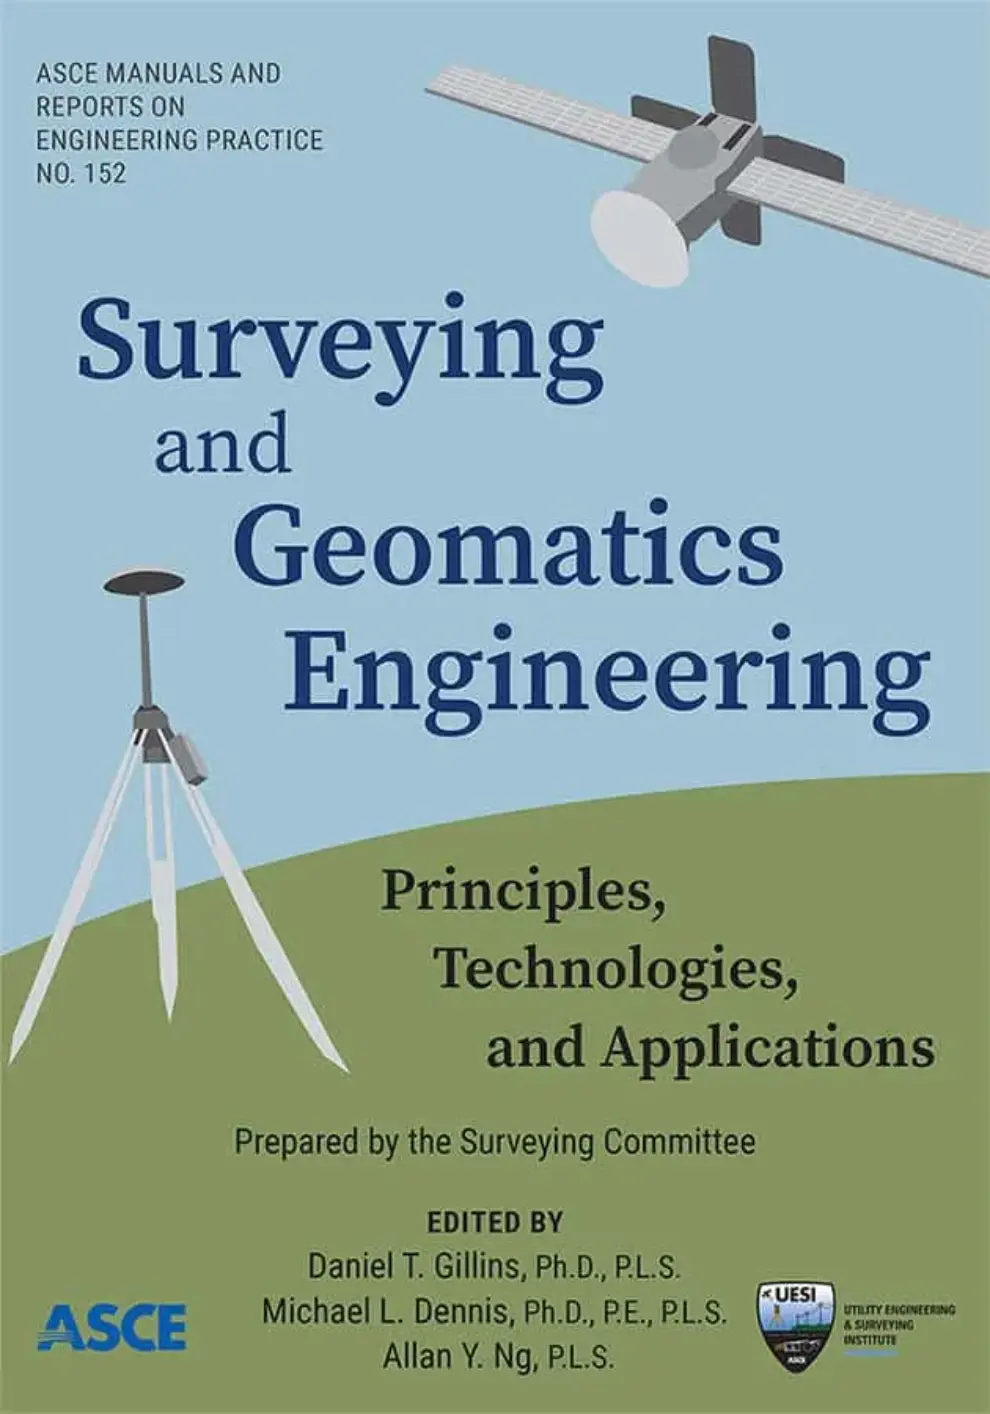 ASCE Manual of Practice 152 Provides New Guidance for  Surveying and Geomatics Engineering